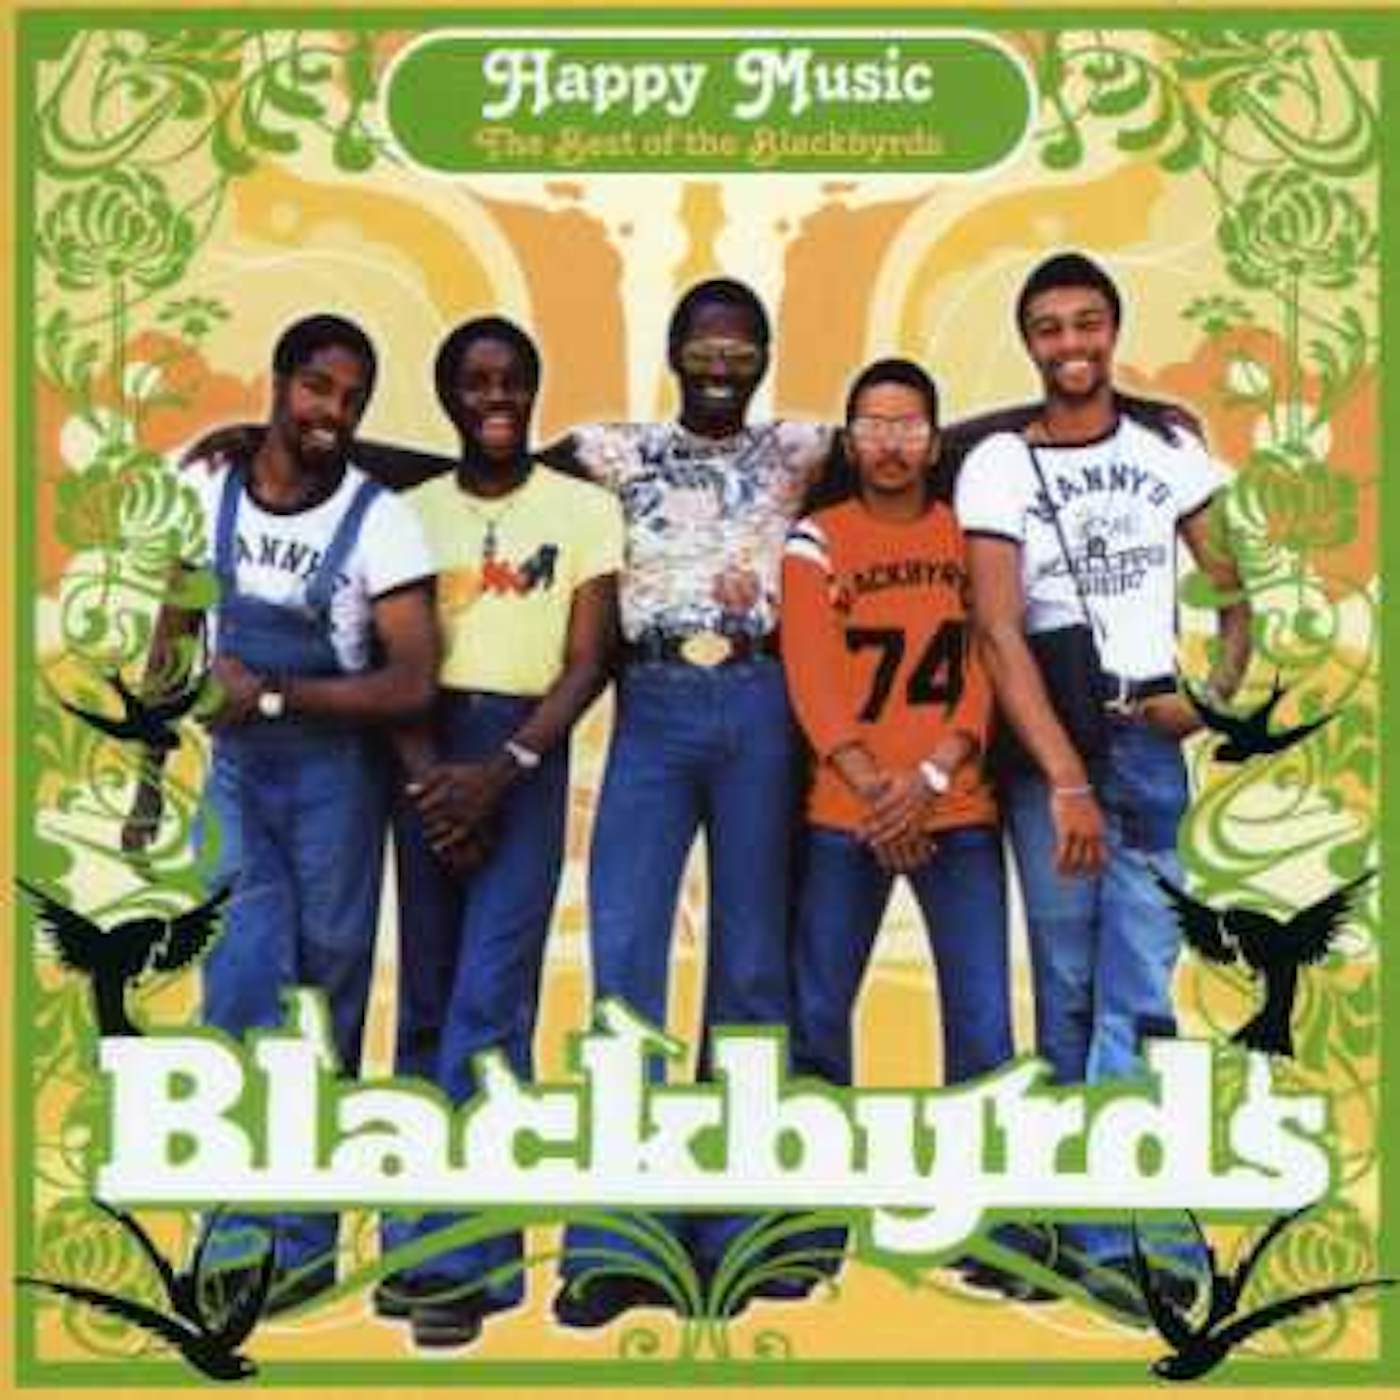 HAPPY MUSIC: THE BEST OF THE BLACKBYRDS CD